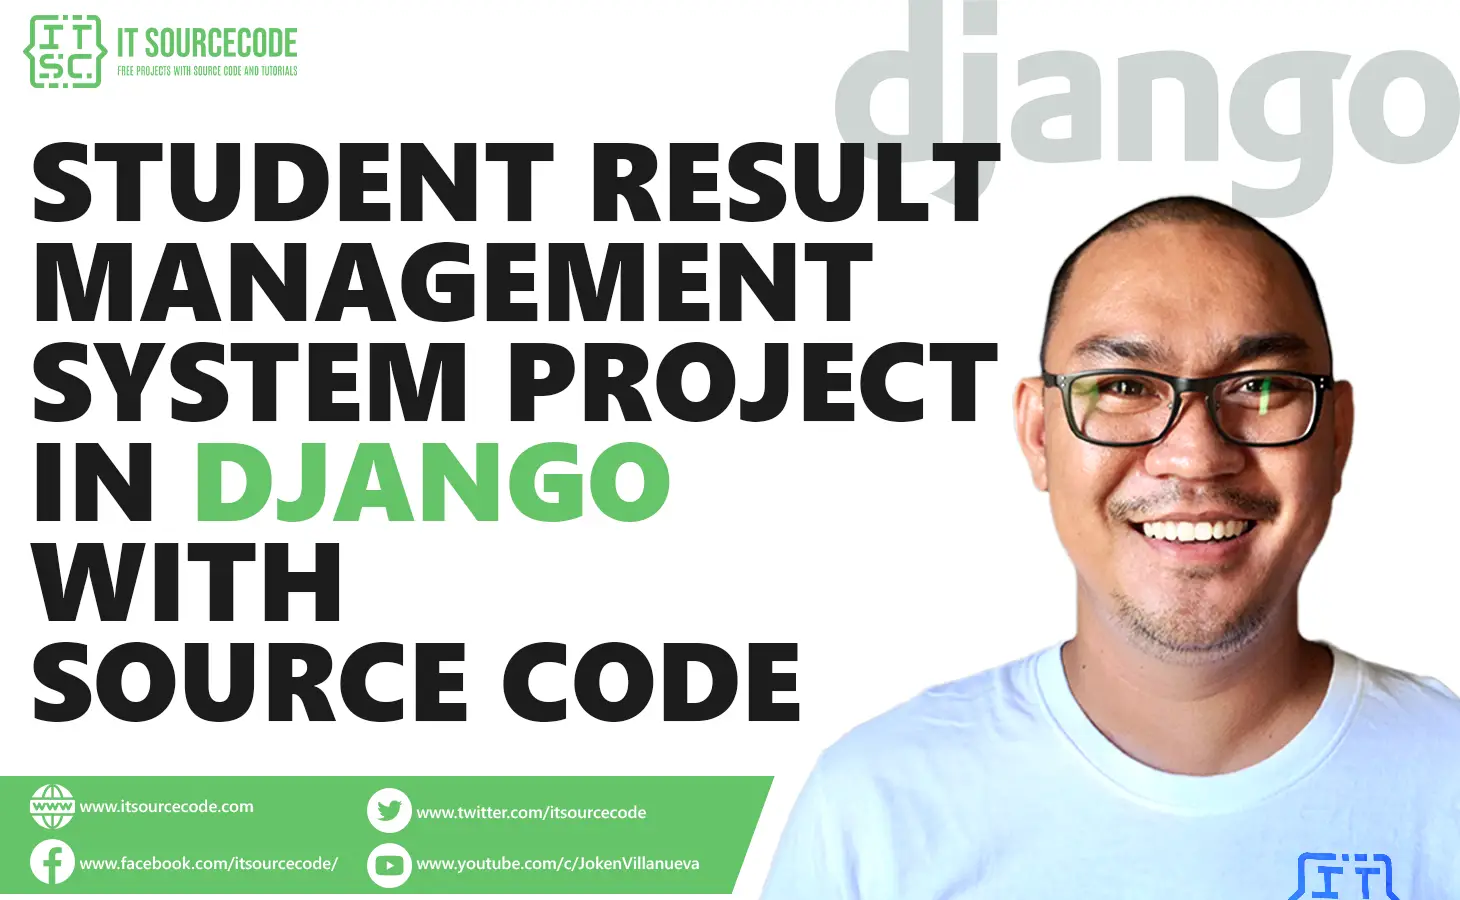 Student Result Management System Project in Django with Source Code